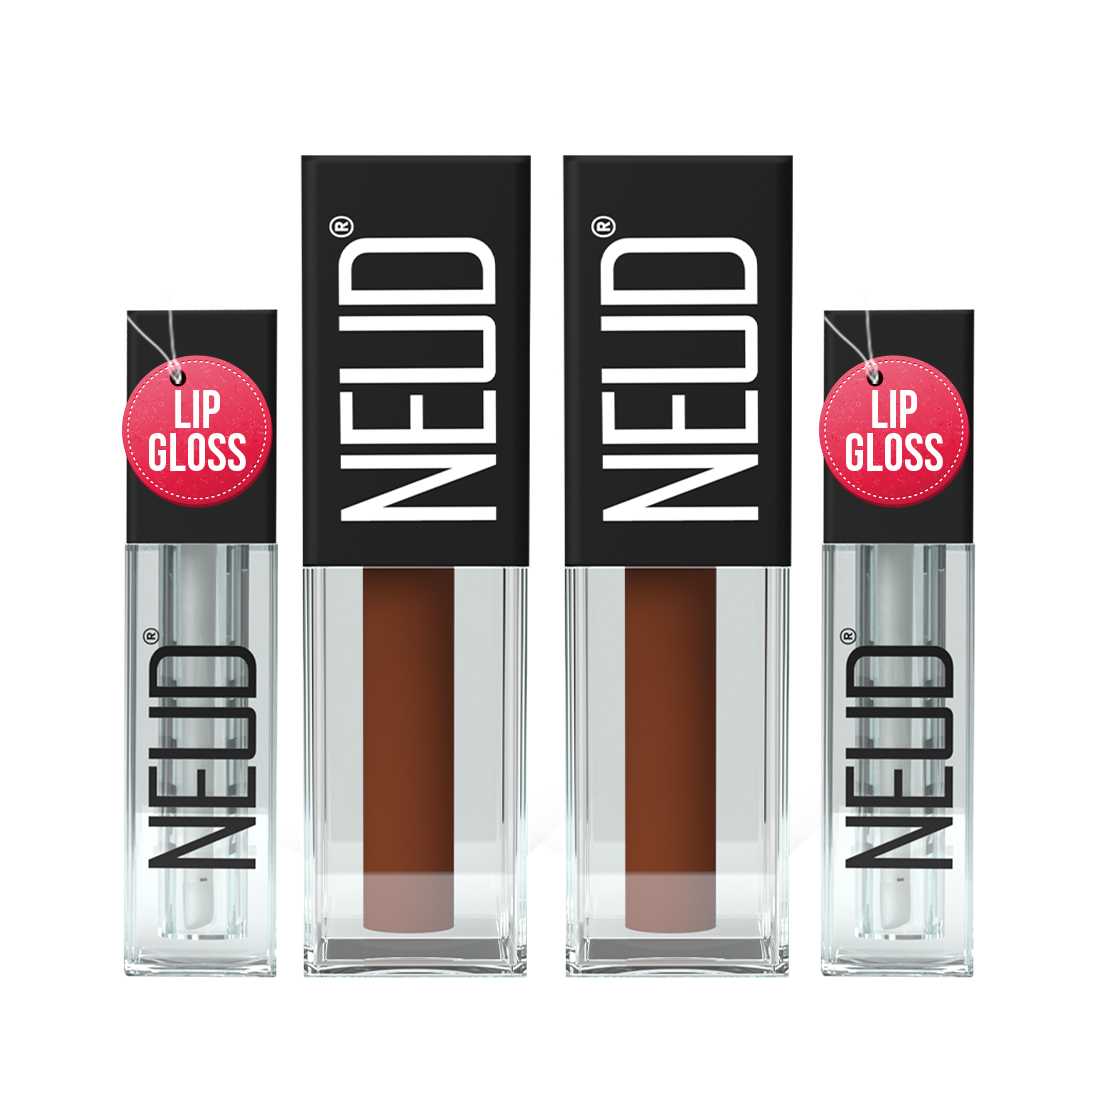 NEUD Matte Liquid Lipstick Oh My Coco with Jojoba Oil, Vitamin E and Almond Oil - Smudge Proof 12-hour Stay Formula with Free Lip Gloss